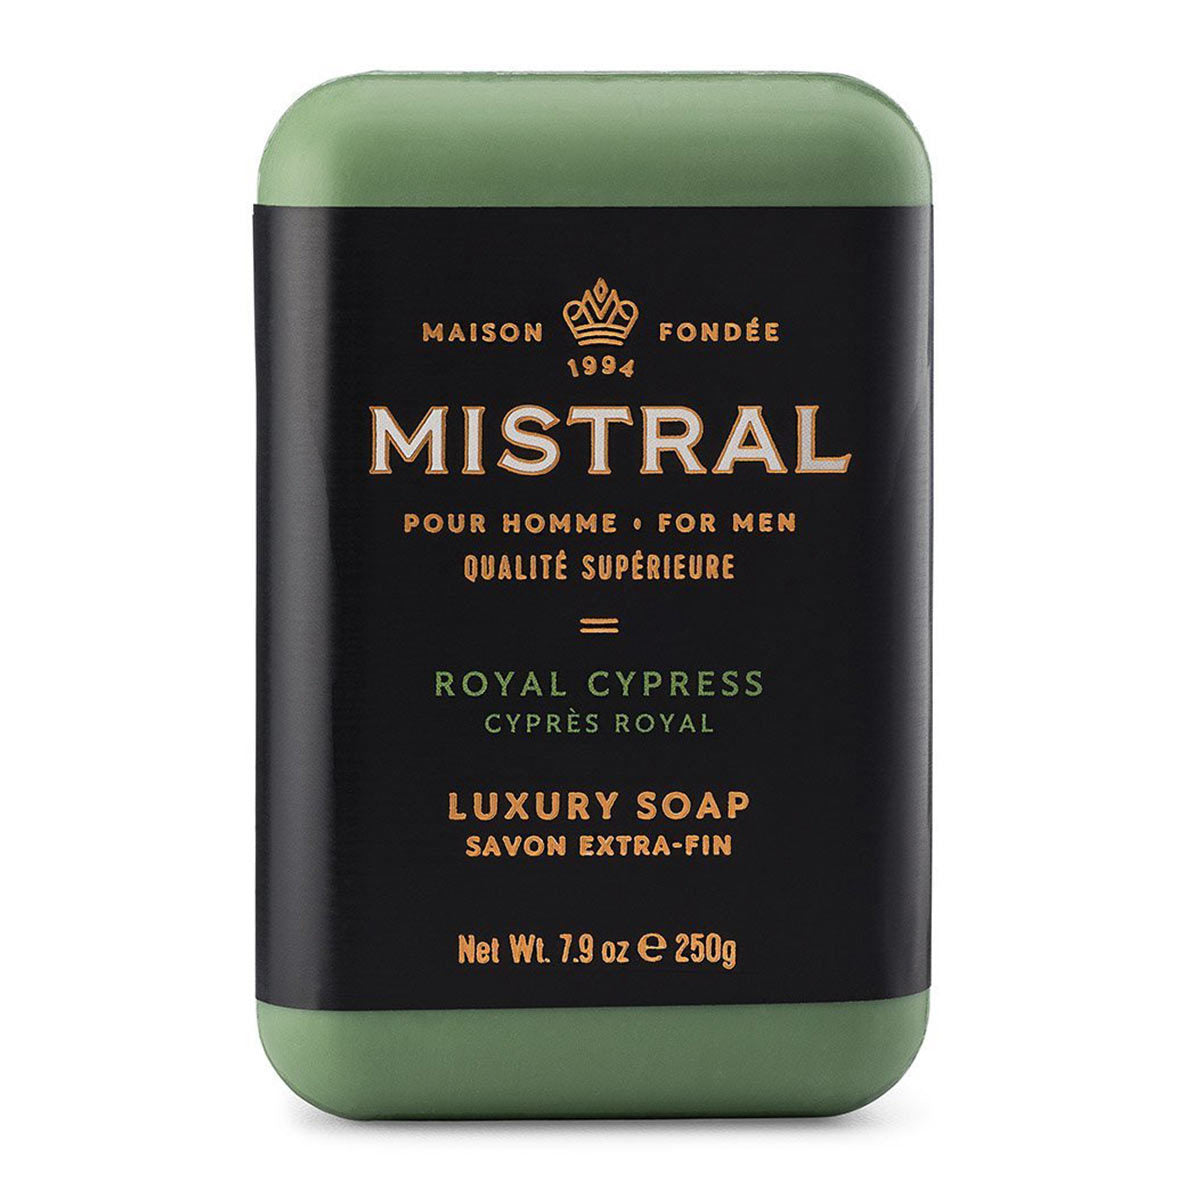 Primary image of Royal Cypress Bar Soap